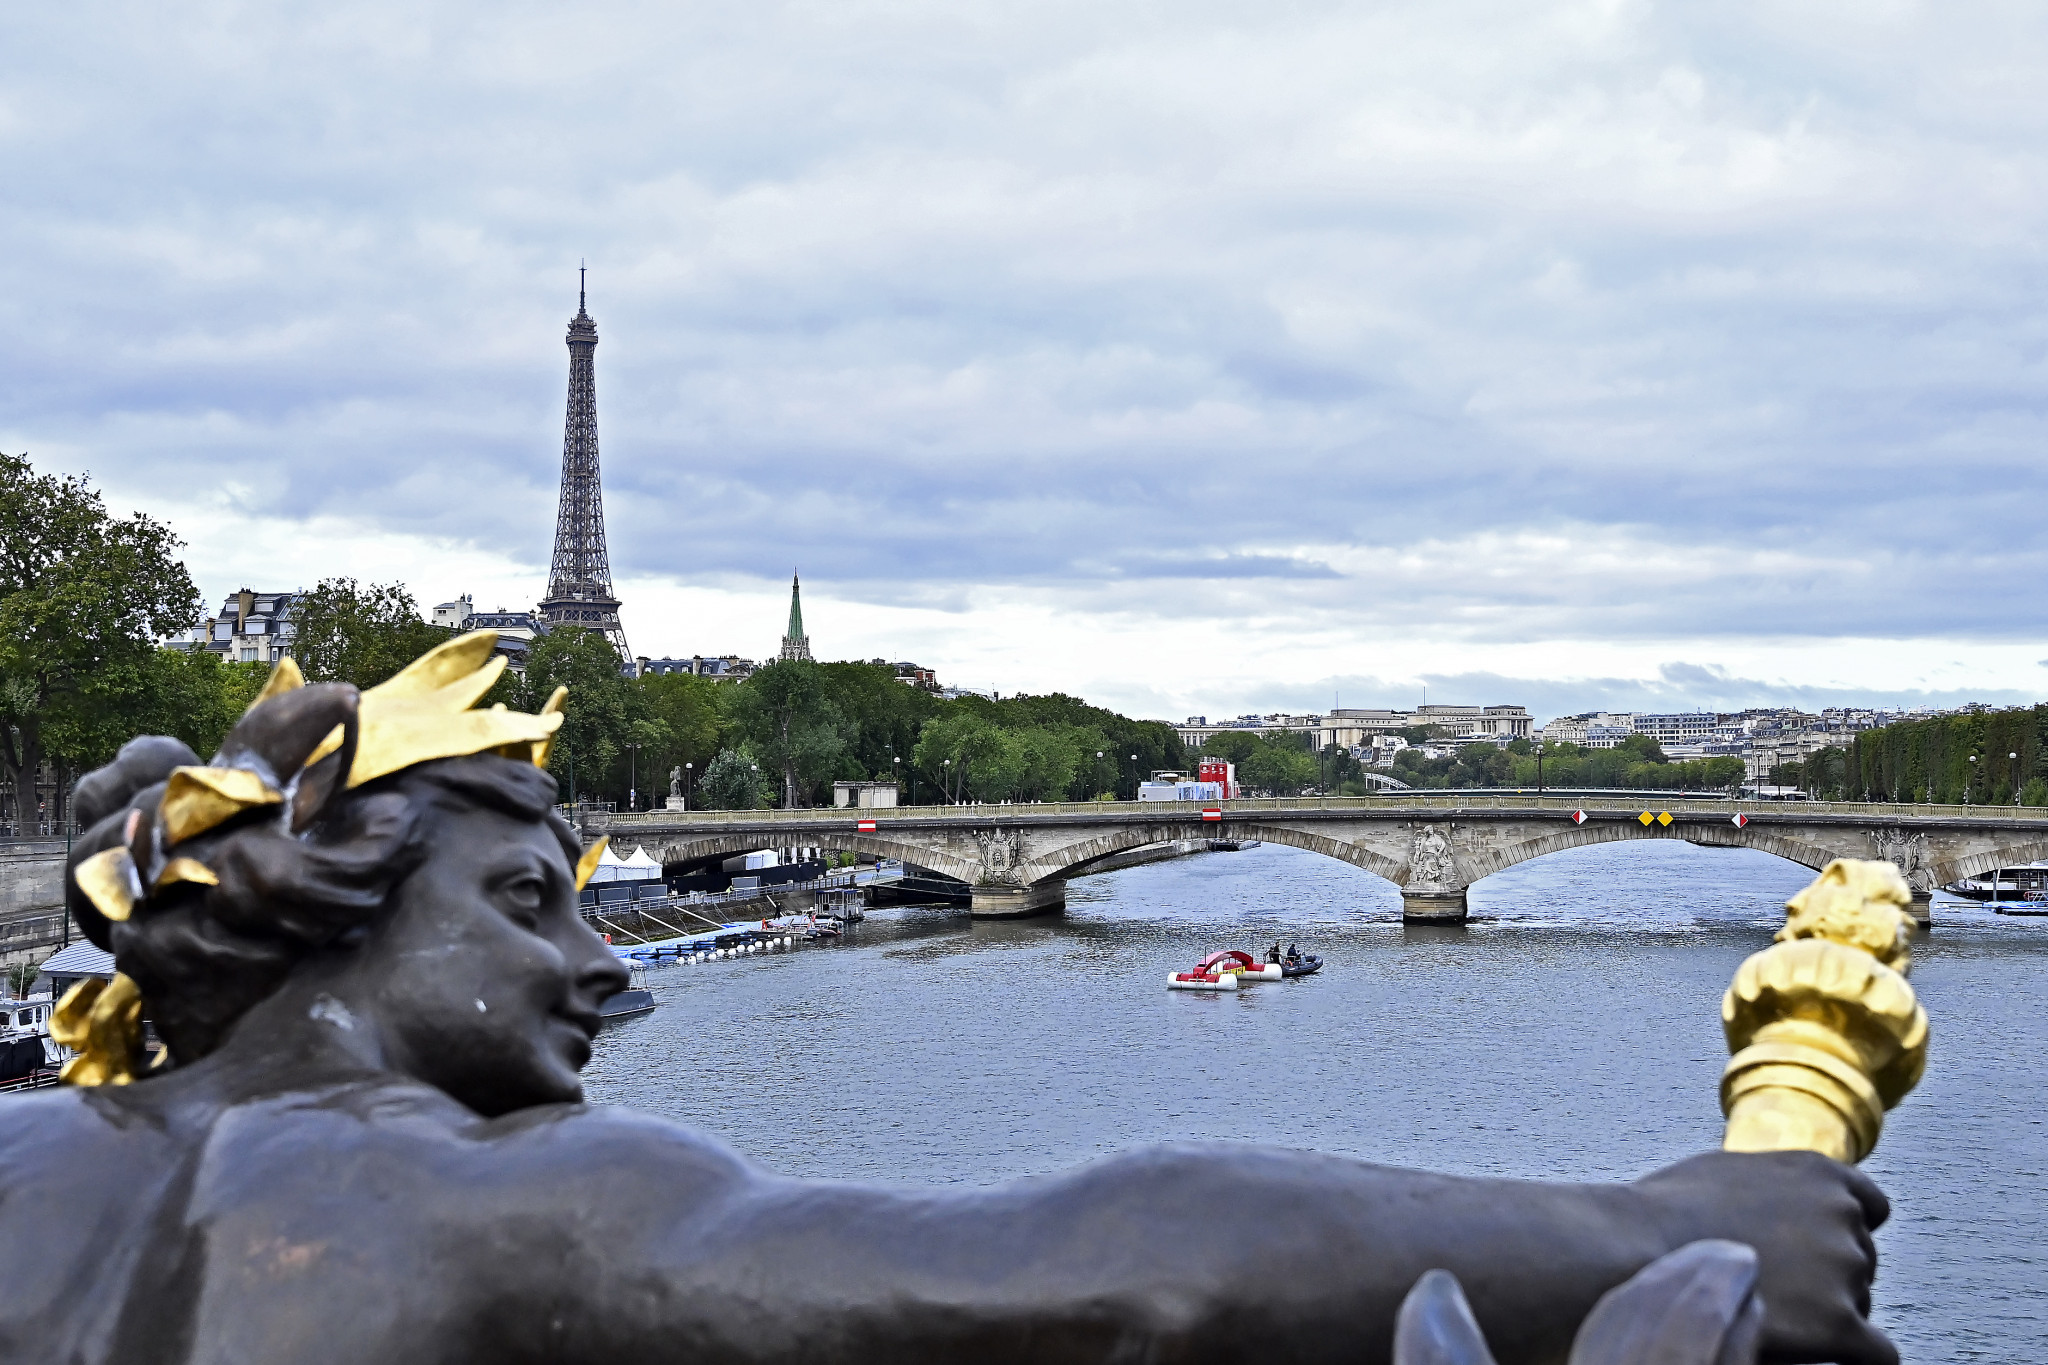 Paris 2024 warned more work needs to be done cleaning up Seine after test event cancelled